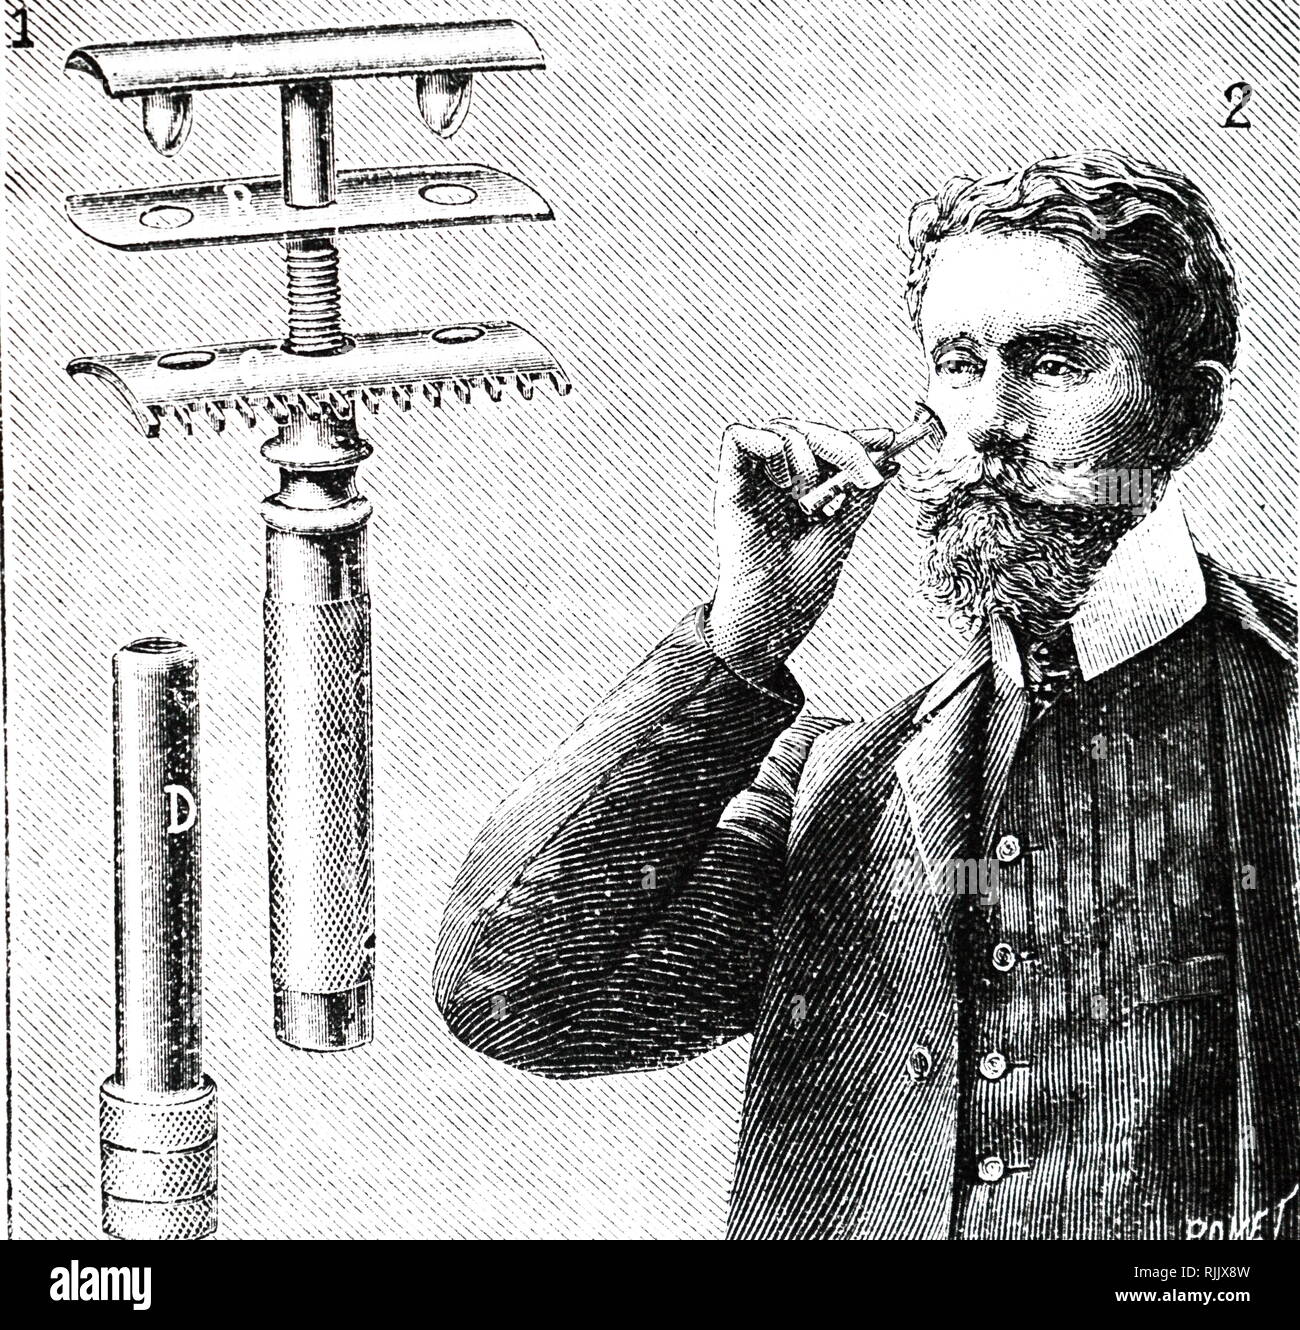 An engraving depicting King Gillette's safety razor with replaceable blades. Dated 20th century Stock Photo